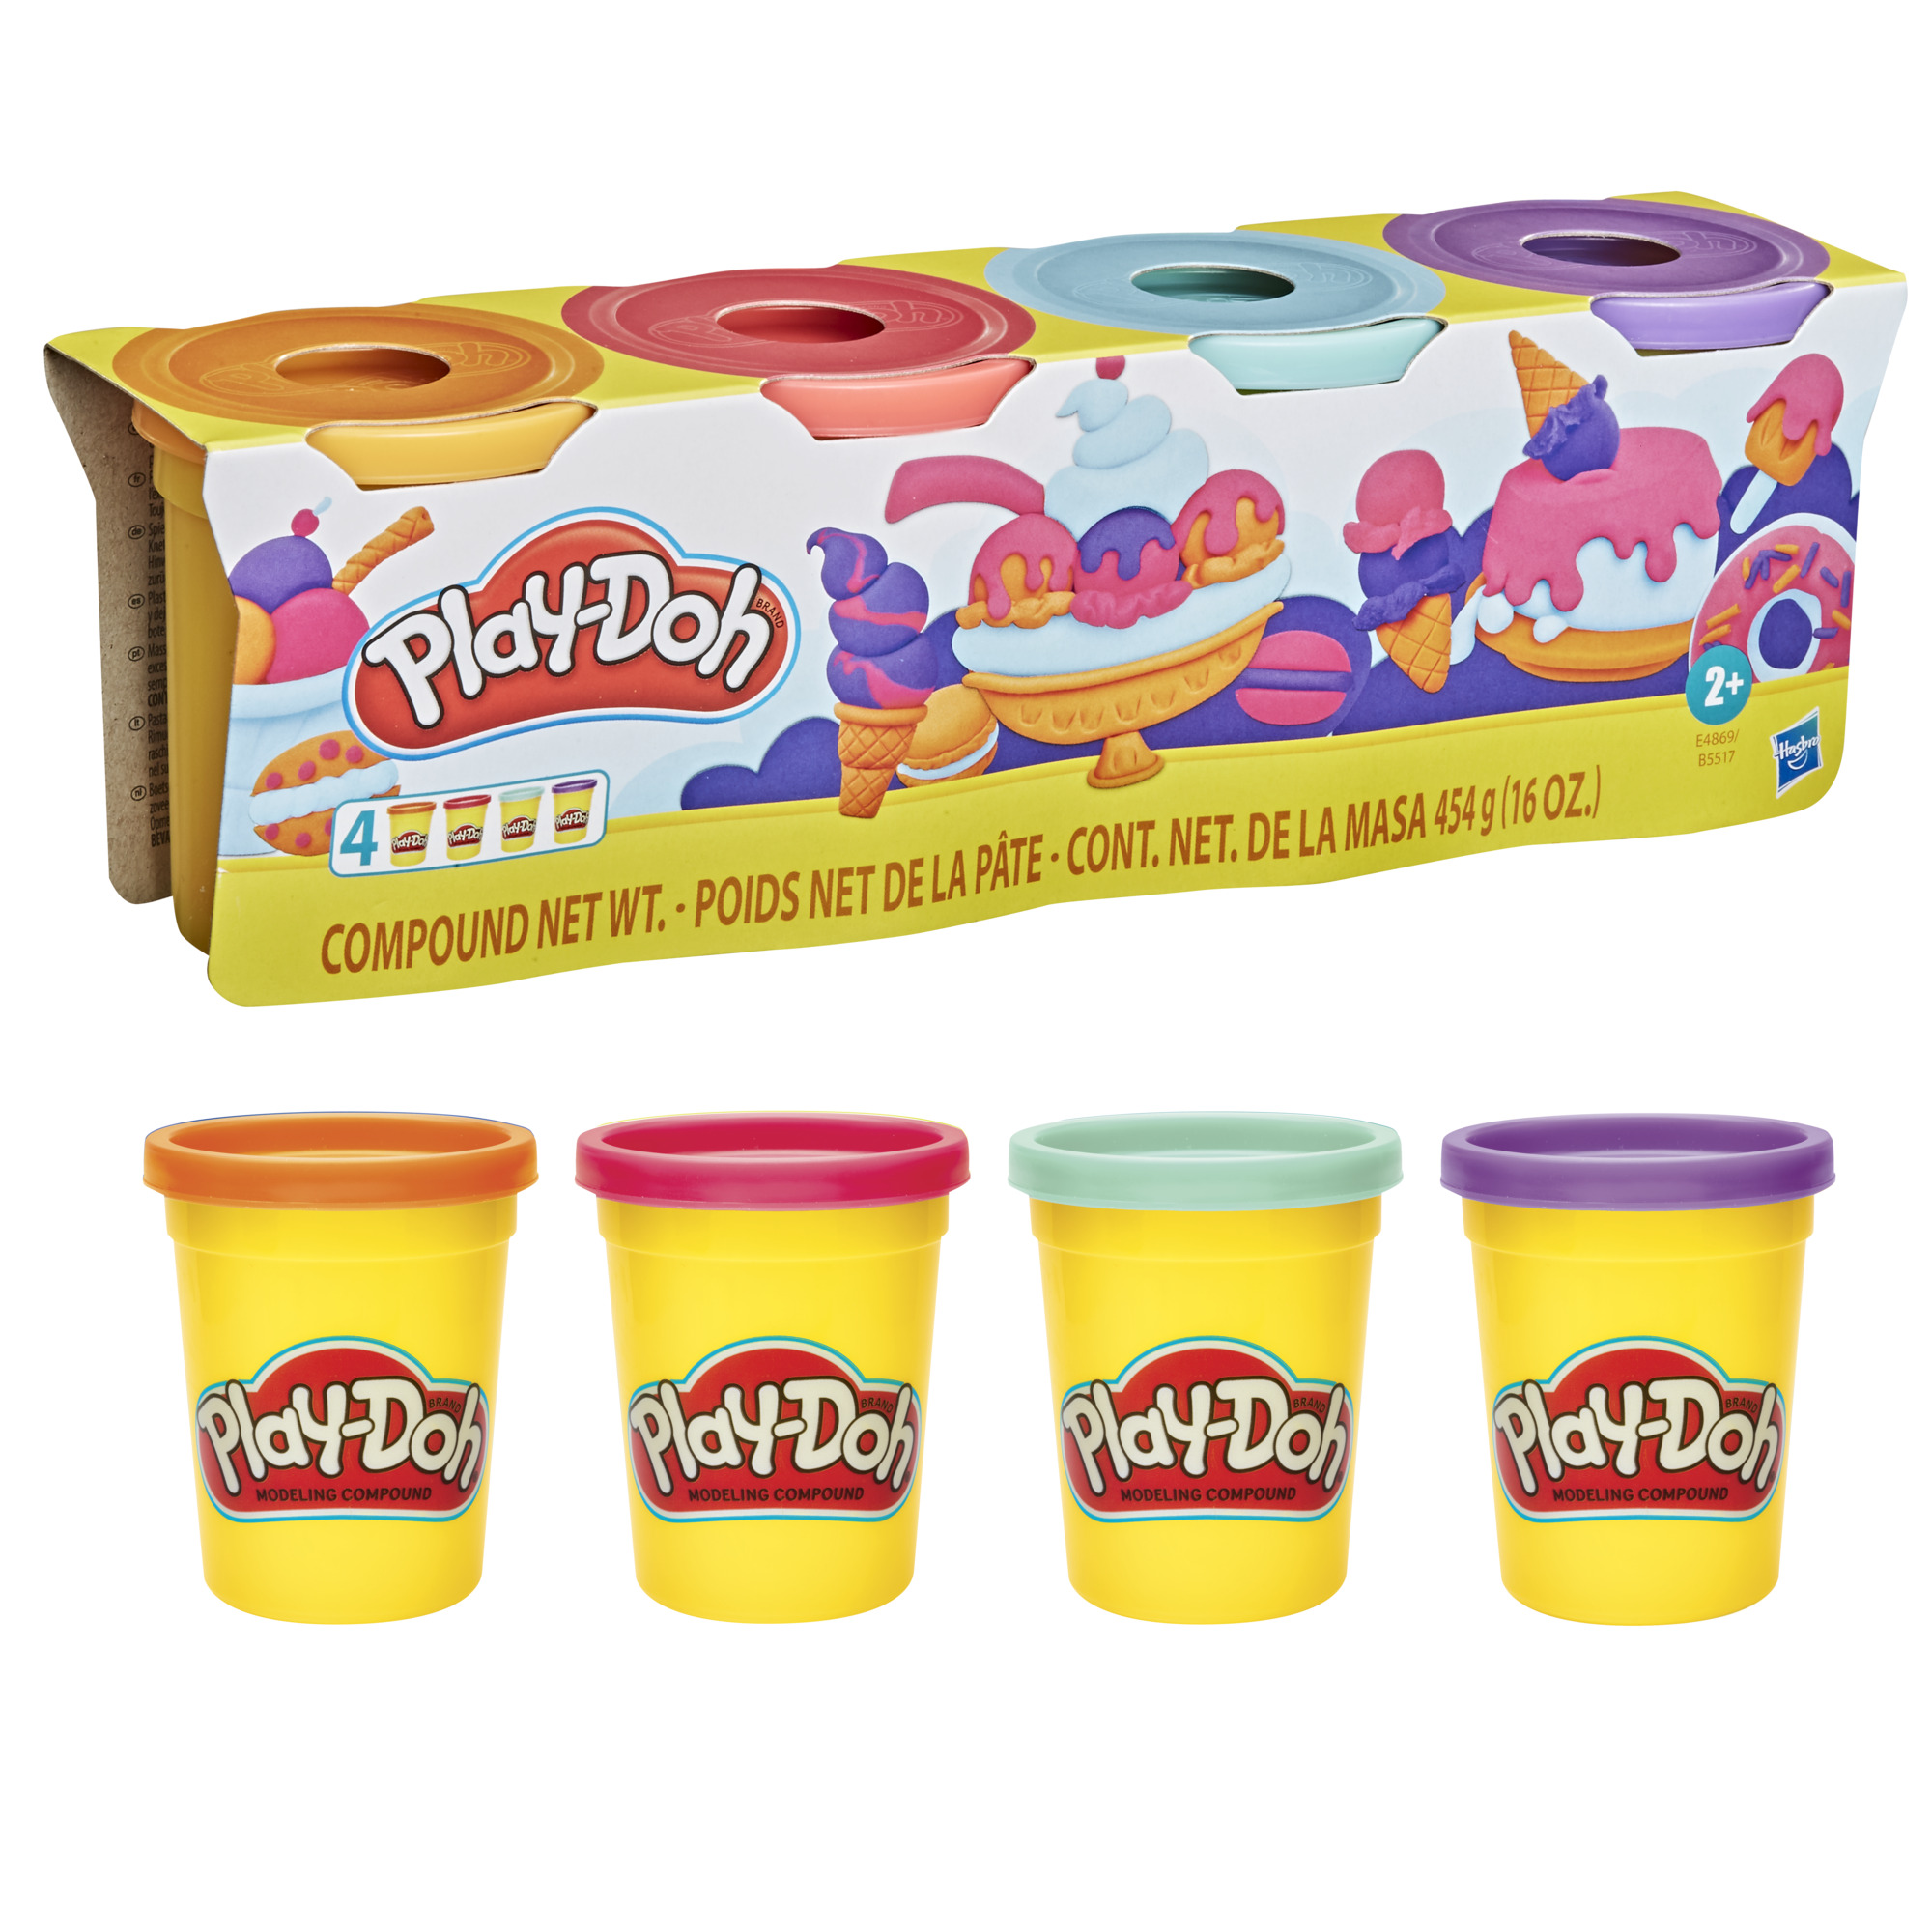 Play-Doh Modeling Compound Color Wheel Play-Doh Set, 4 Color (4 Piece), Kids Toddler Toy for Boys and Girls, Age 3 4 5 6 7 and Up - image 1 of 5